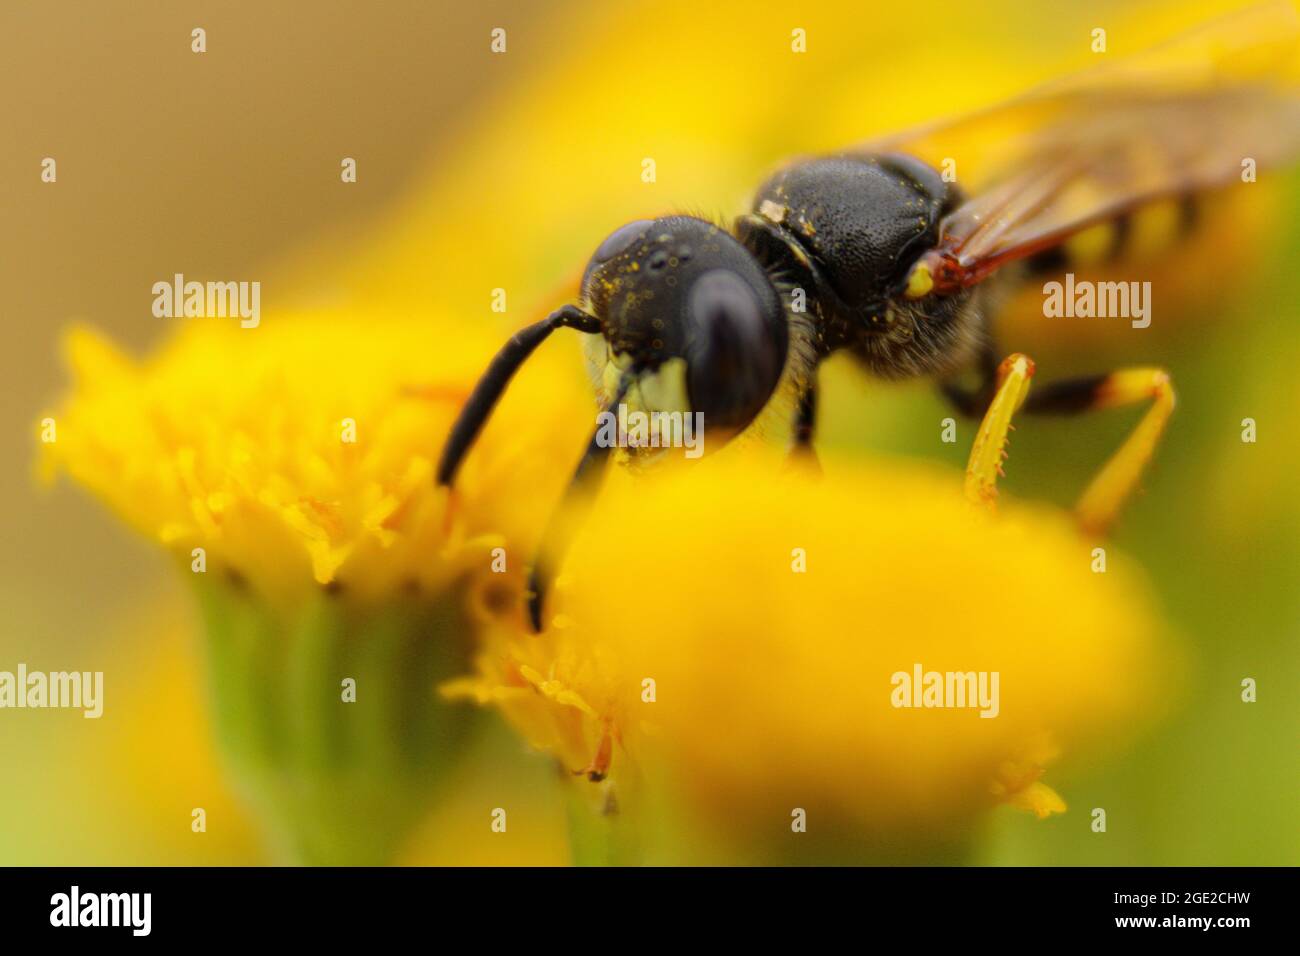 A wasp on an adventure Stock Photo